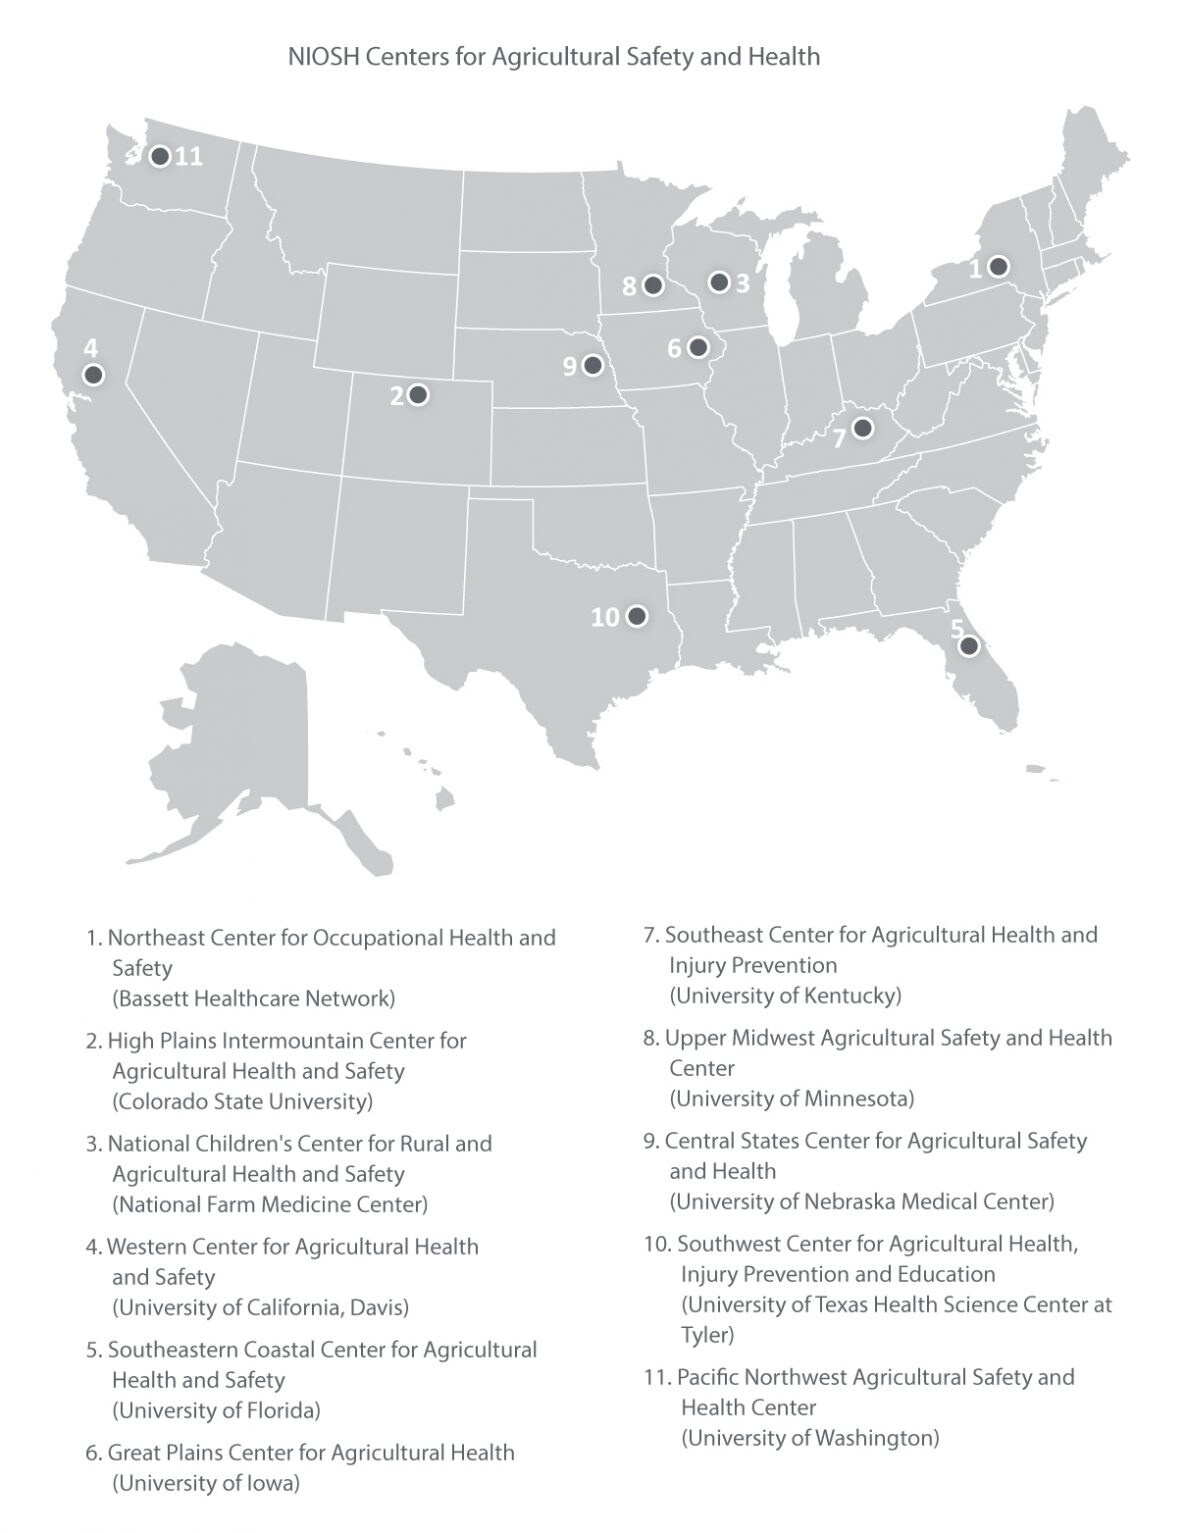 NIOSH Centers for Agricultural Safety and Health Map of USA